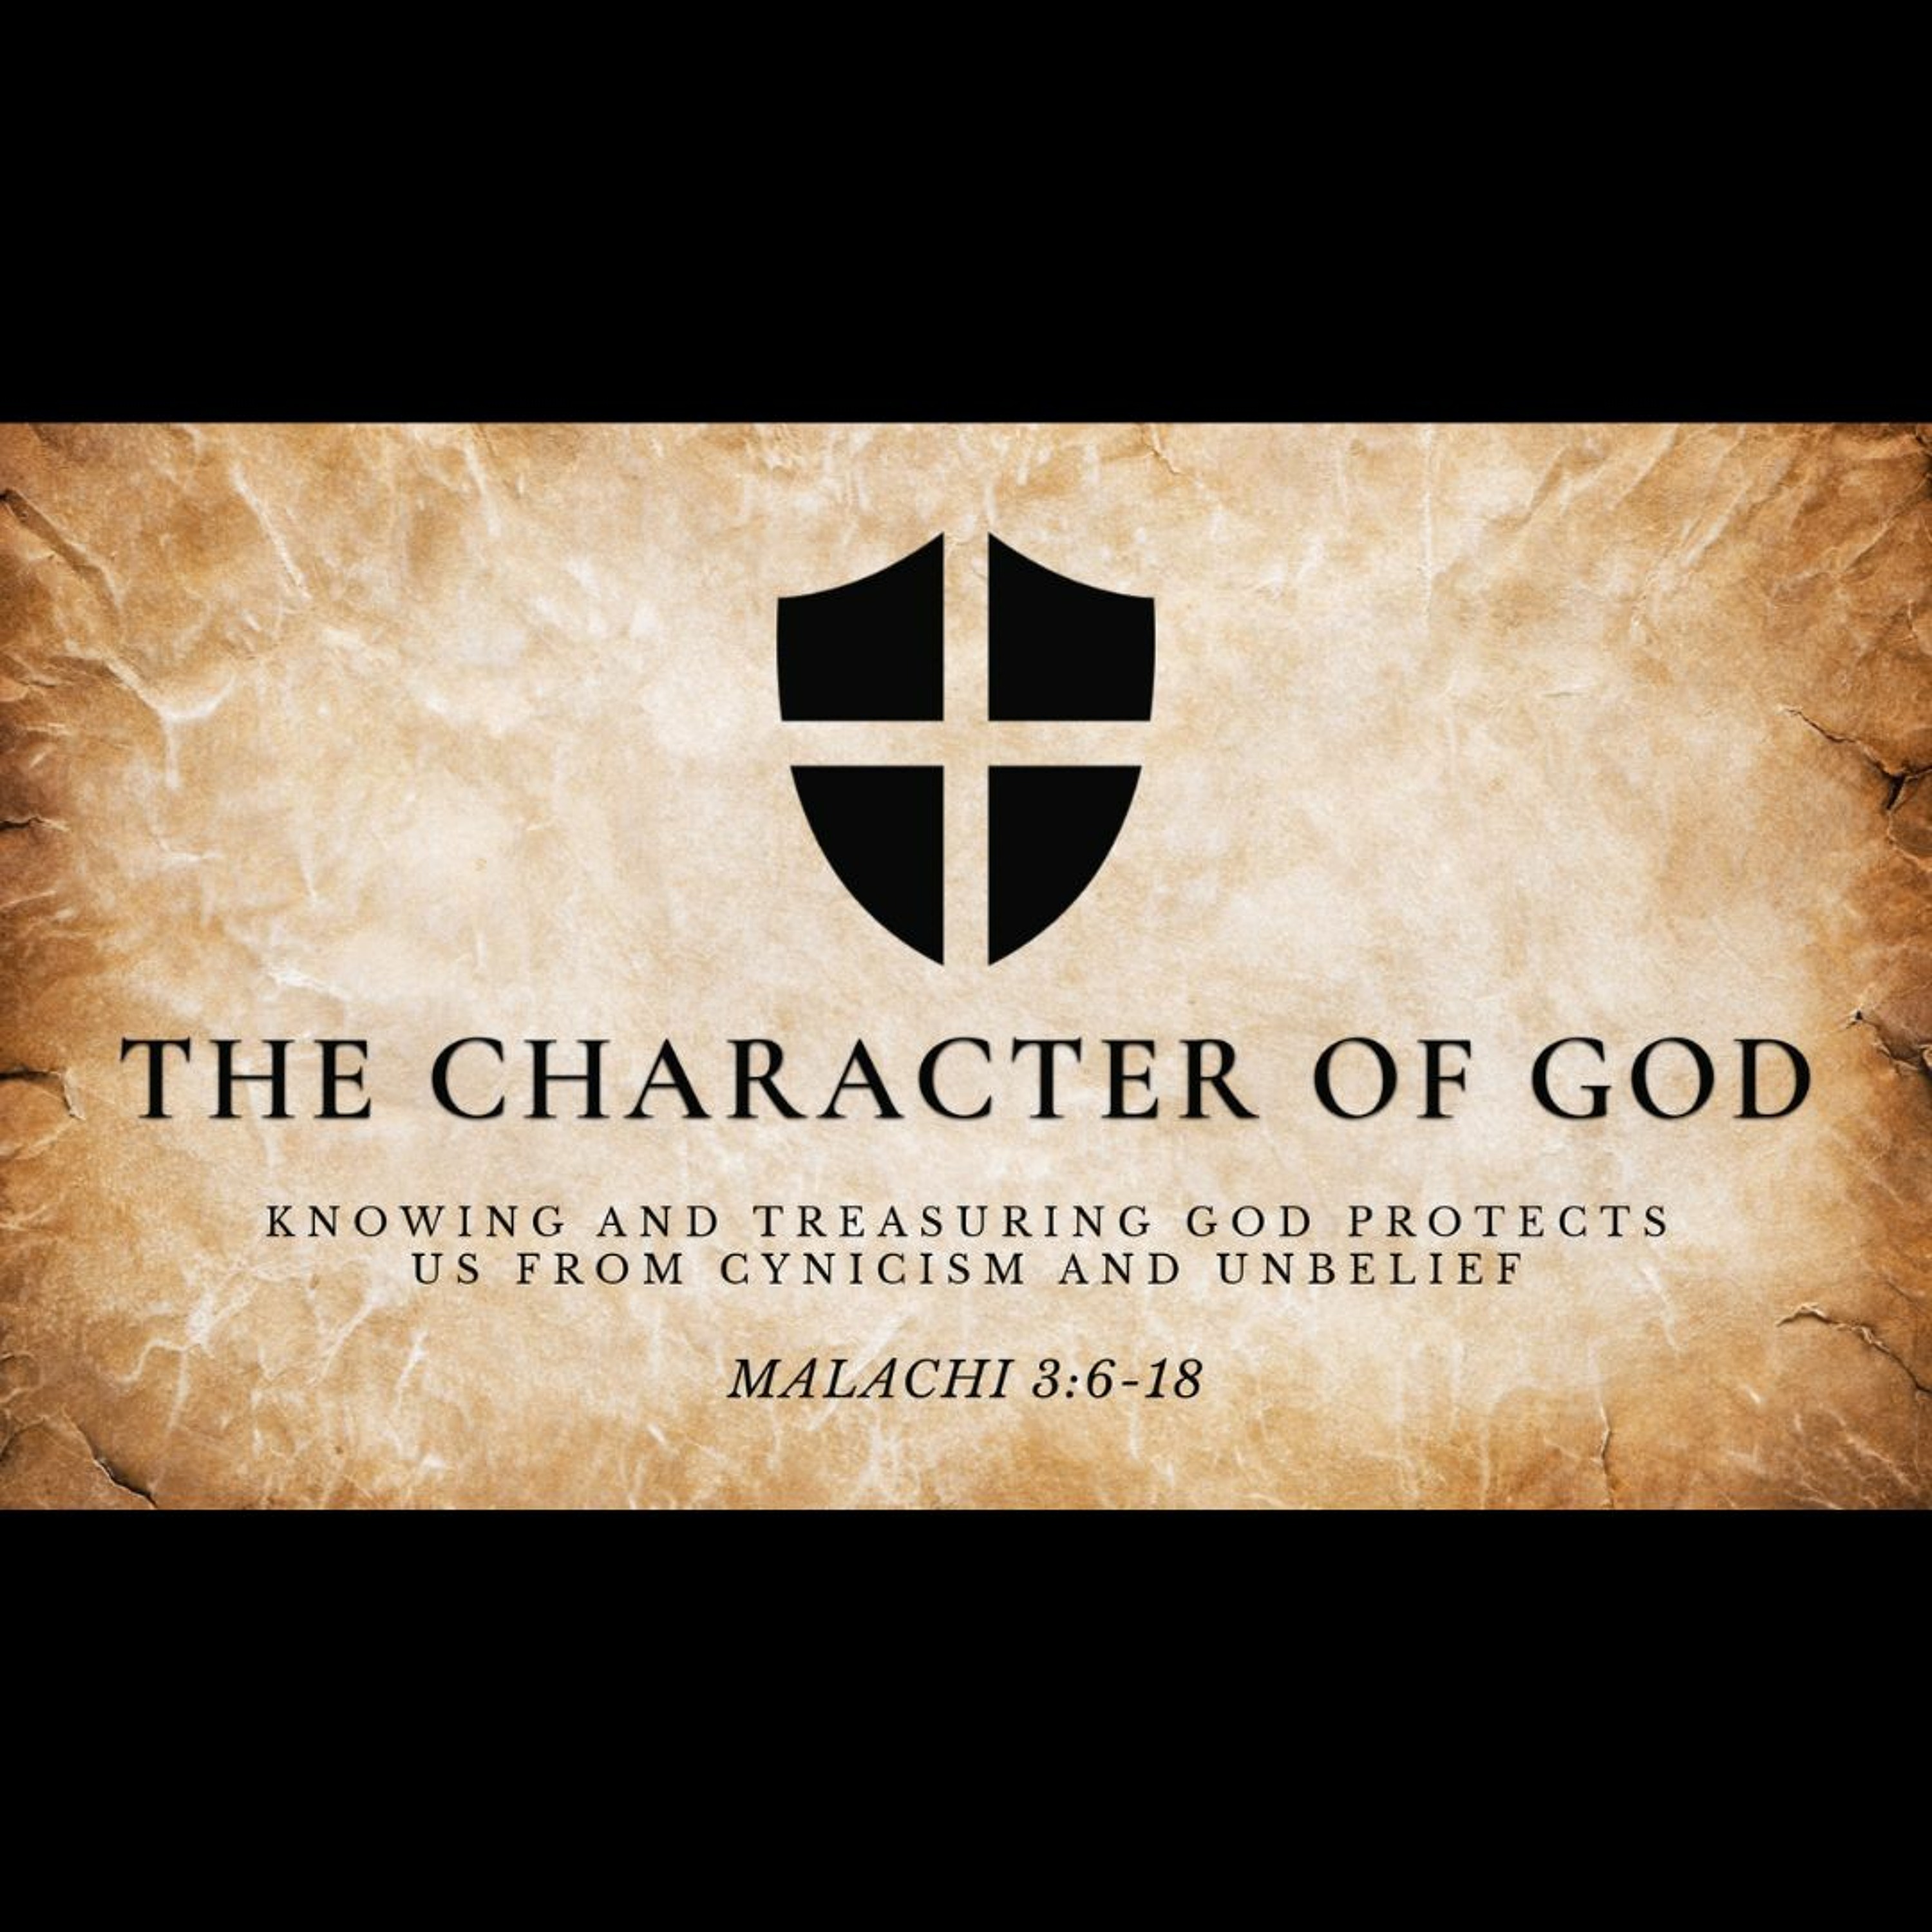 The Character of God (Malachi 3:6-18)